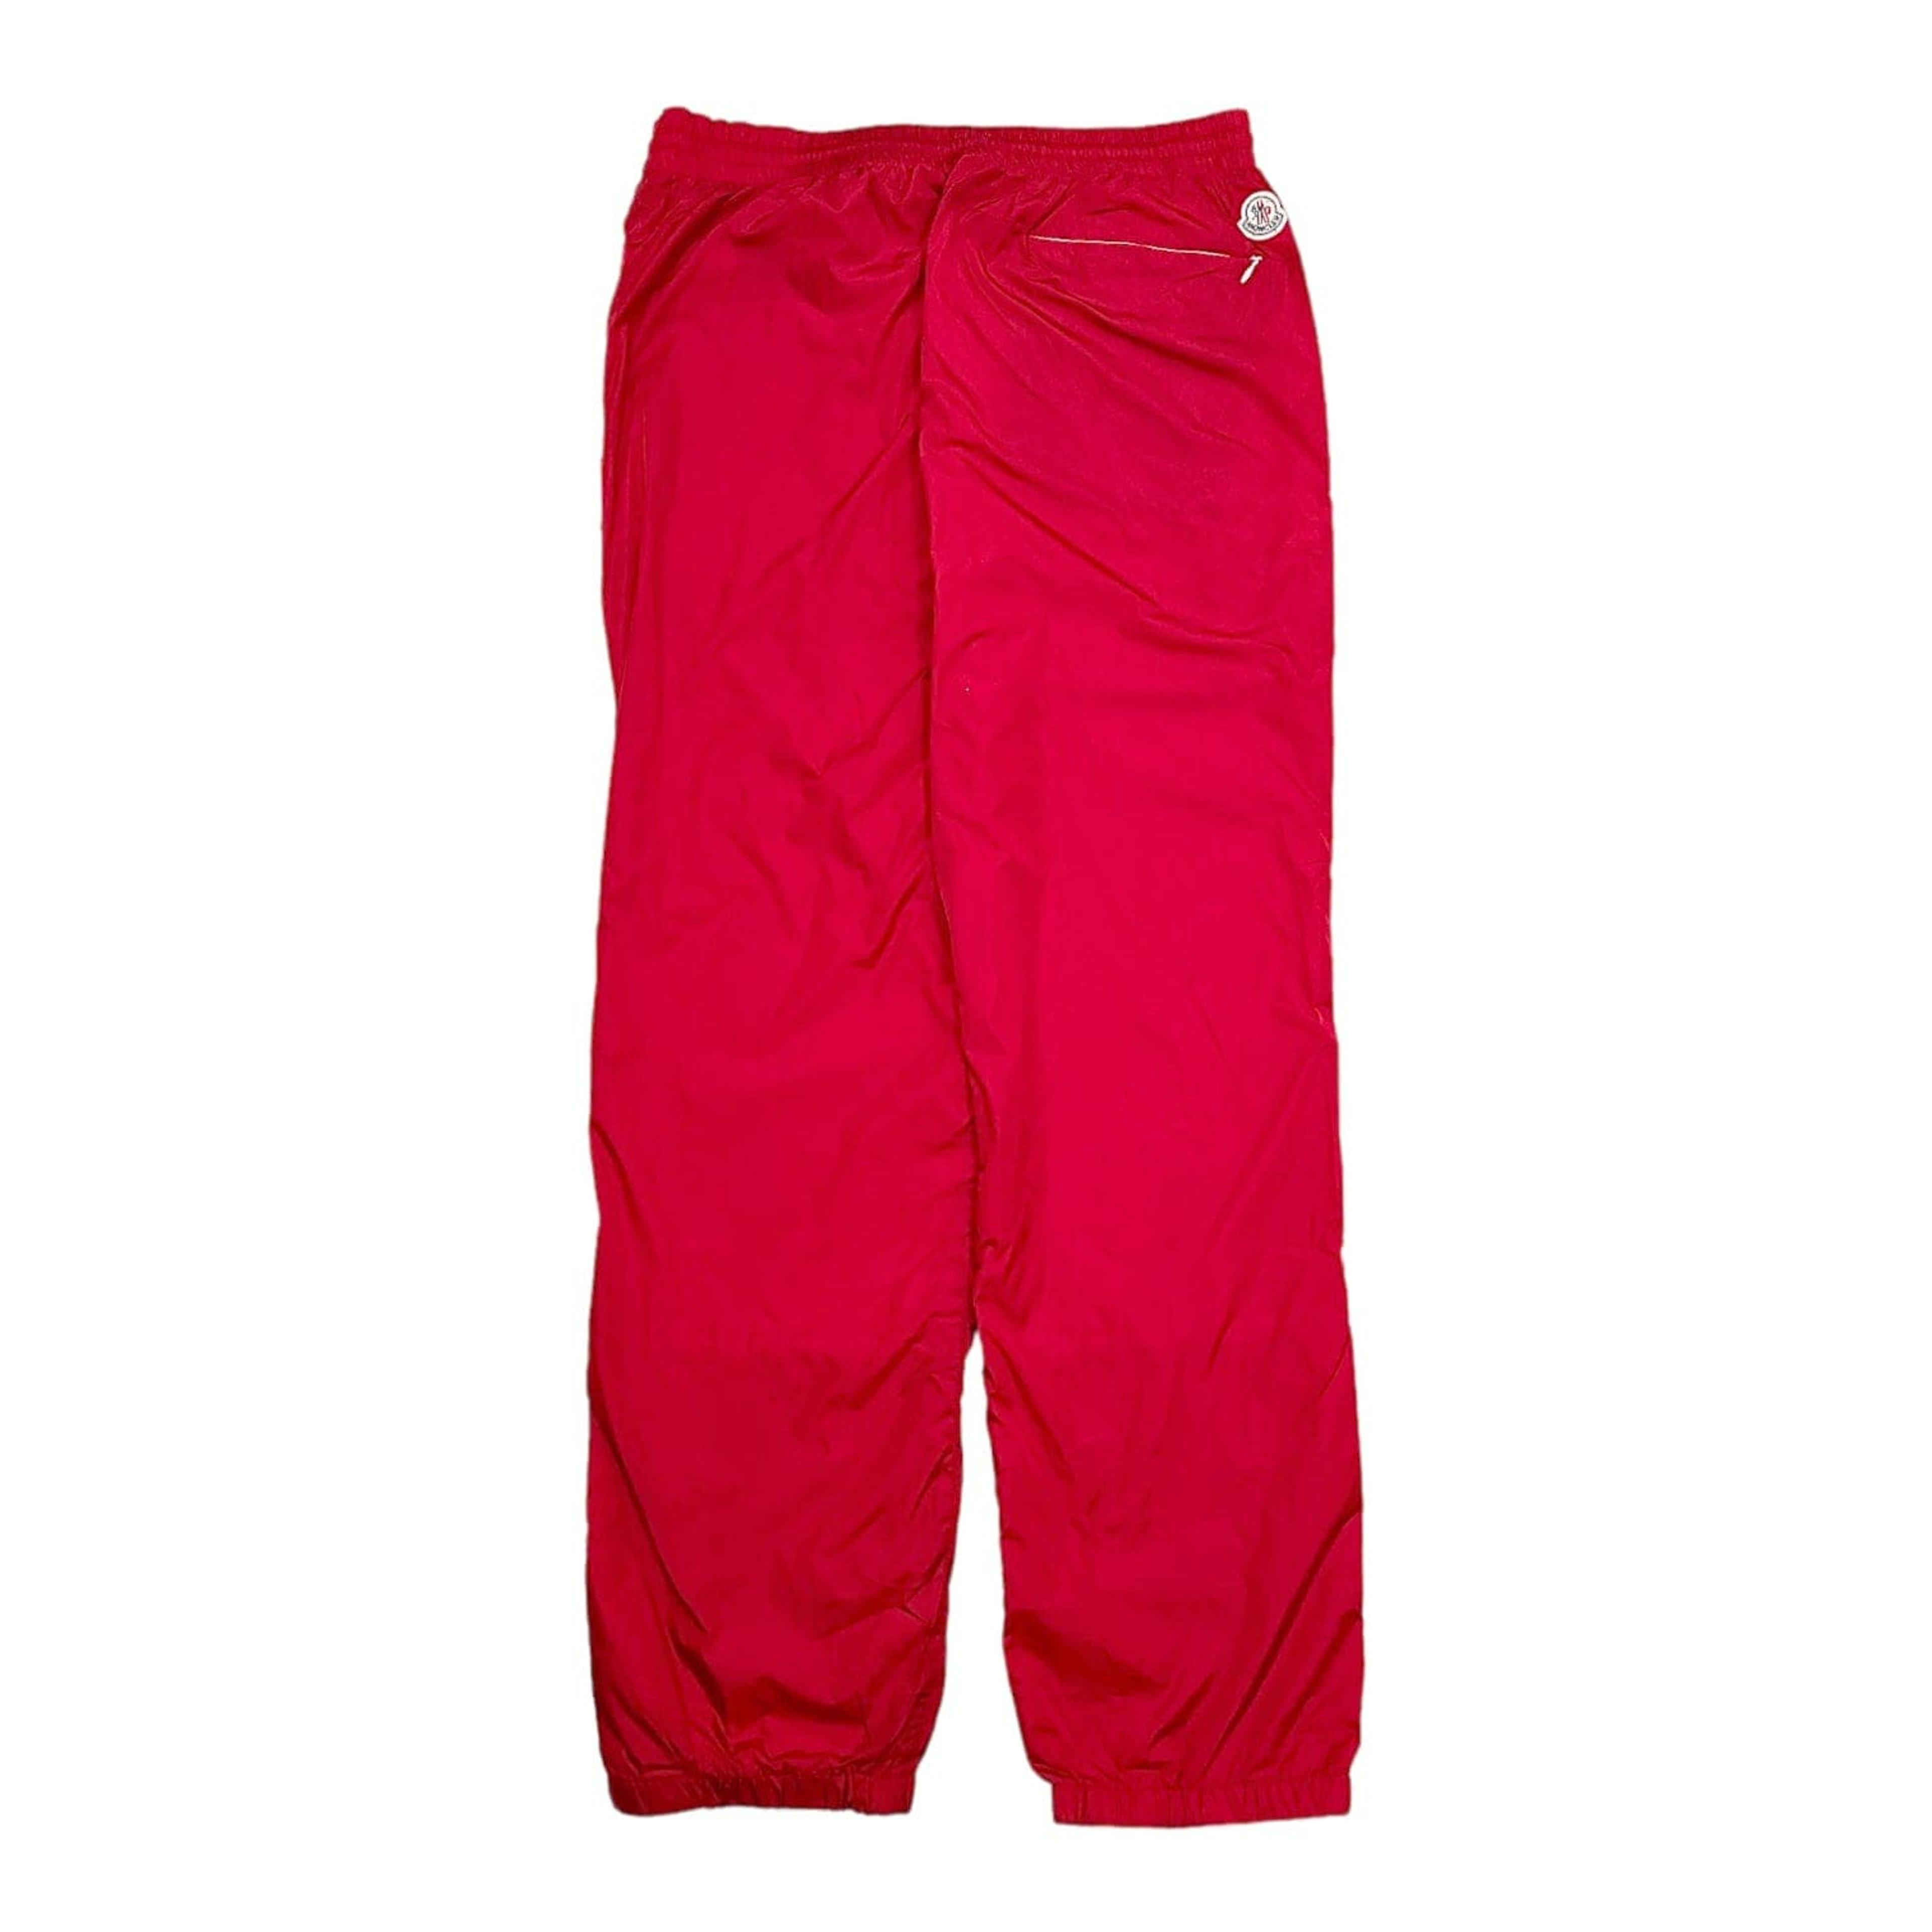 Alternate View 1 of Moncler Pantalone Track Pants Red Pre-Owned